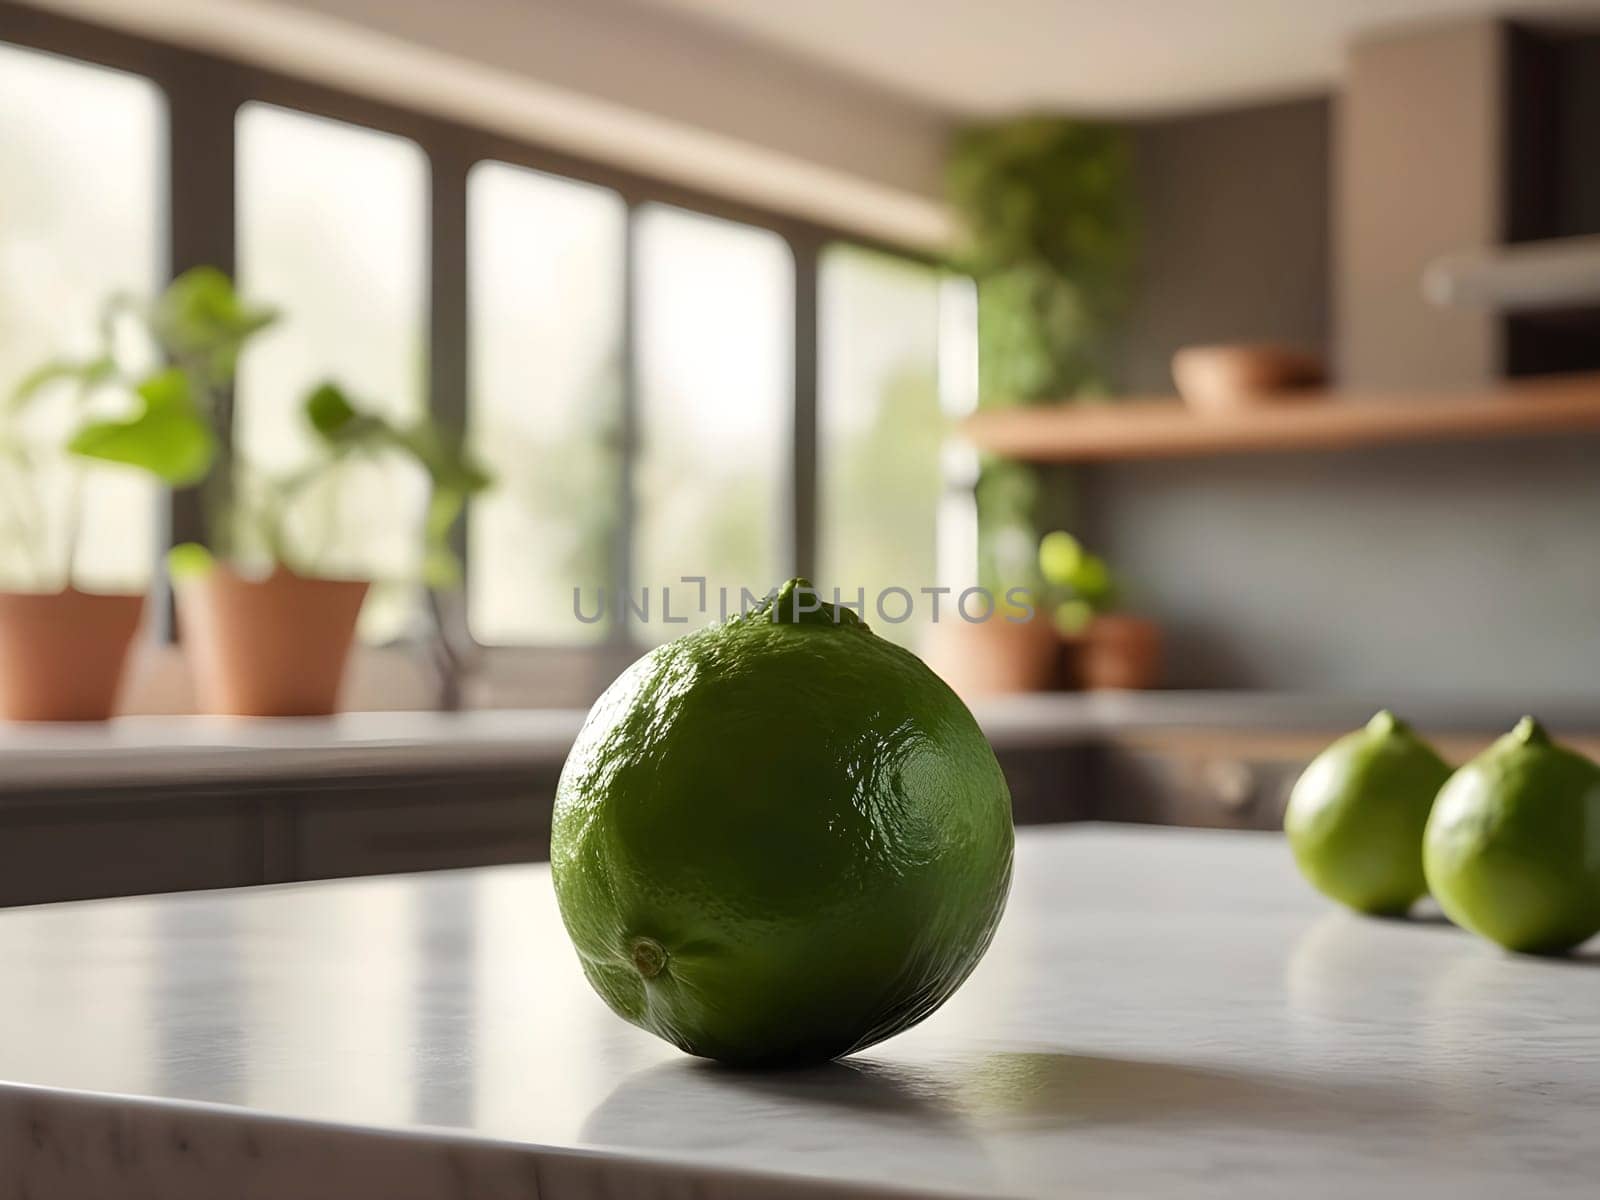 Gourmet Glow: Kaffir Lime Steals the Spotlight in a Softly Lit Afternoon Kitchen.